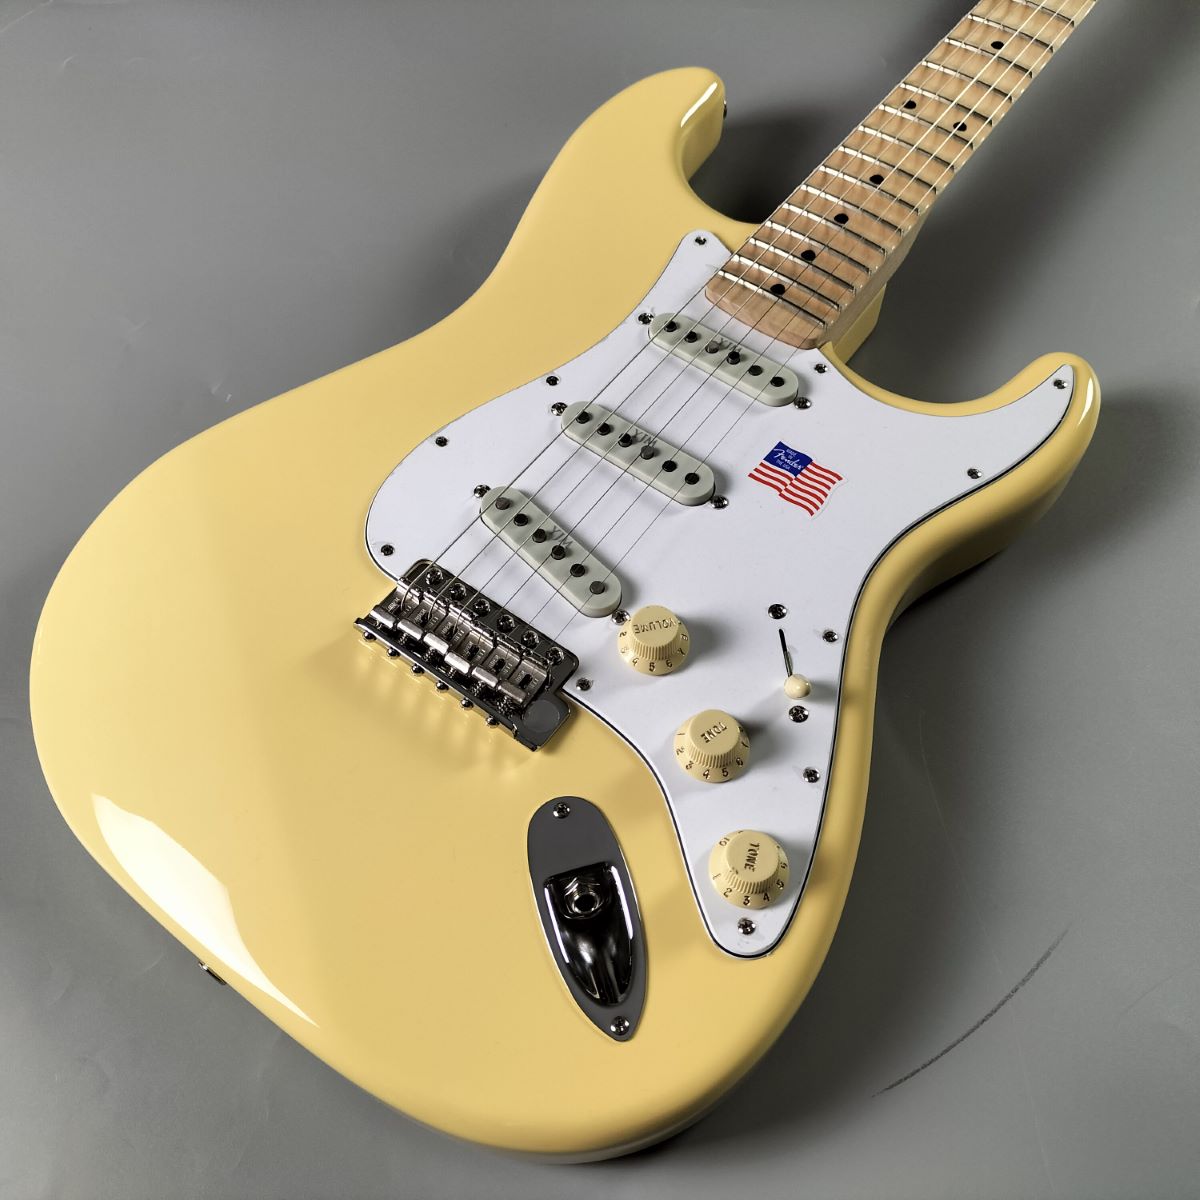 Fender Yngwie Malmsteen Stratocaster Vintage White エレキギター